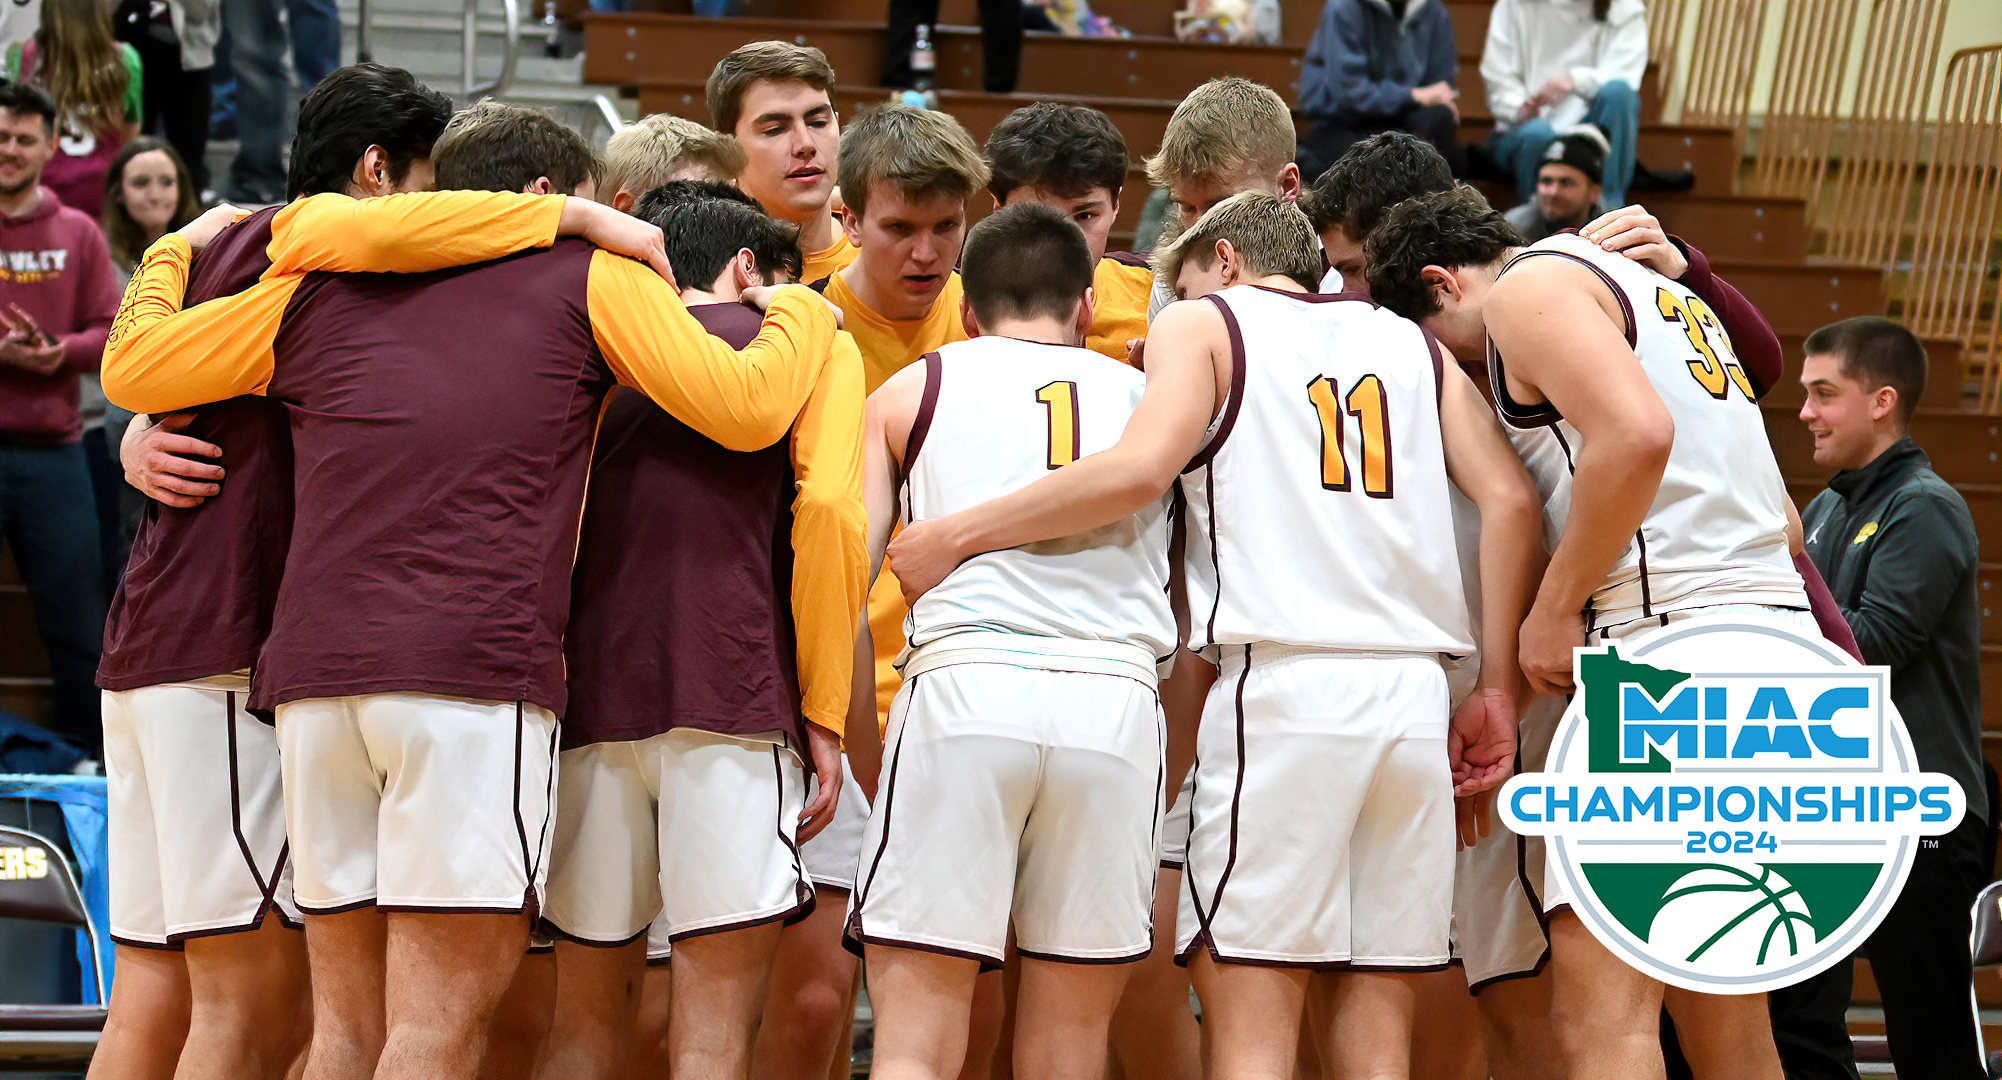 The Cobber men's basketball team earned a spot in the MIAC playoffs for the first time since 2016.